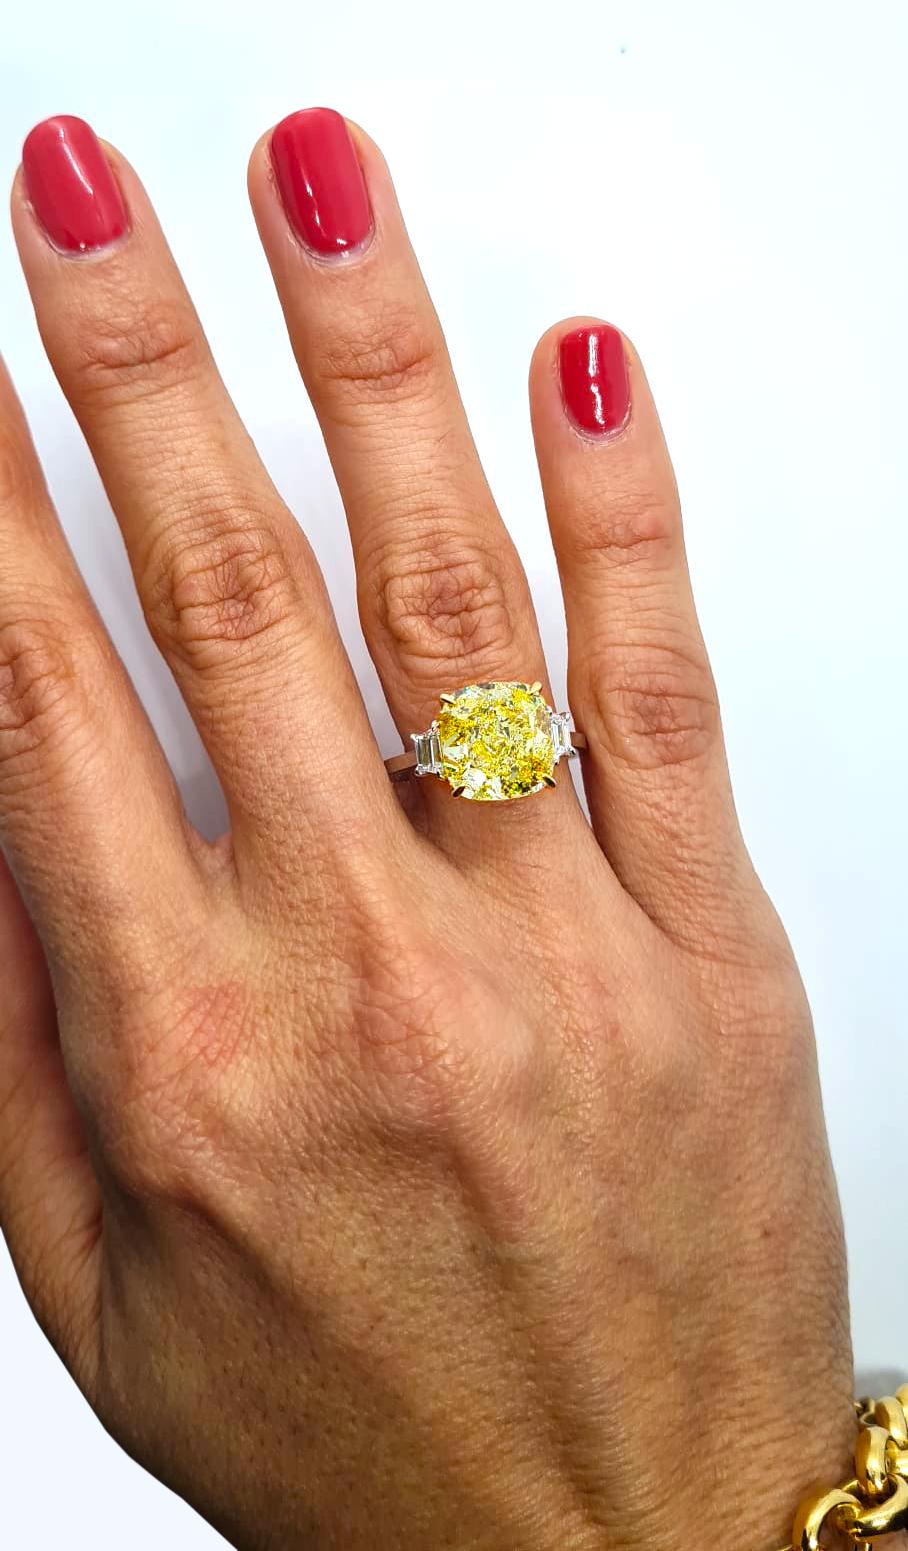 Discover the epitome of elegance and craftsmanship with our magnificent GIA Certified 6.12 Carat Cushion VVS2 Fancy Yellow Diamond Platinum Ring. This exquisite piece is a true testament to timeless luxury and impeccable design.

At the heart of